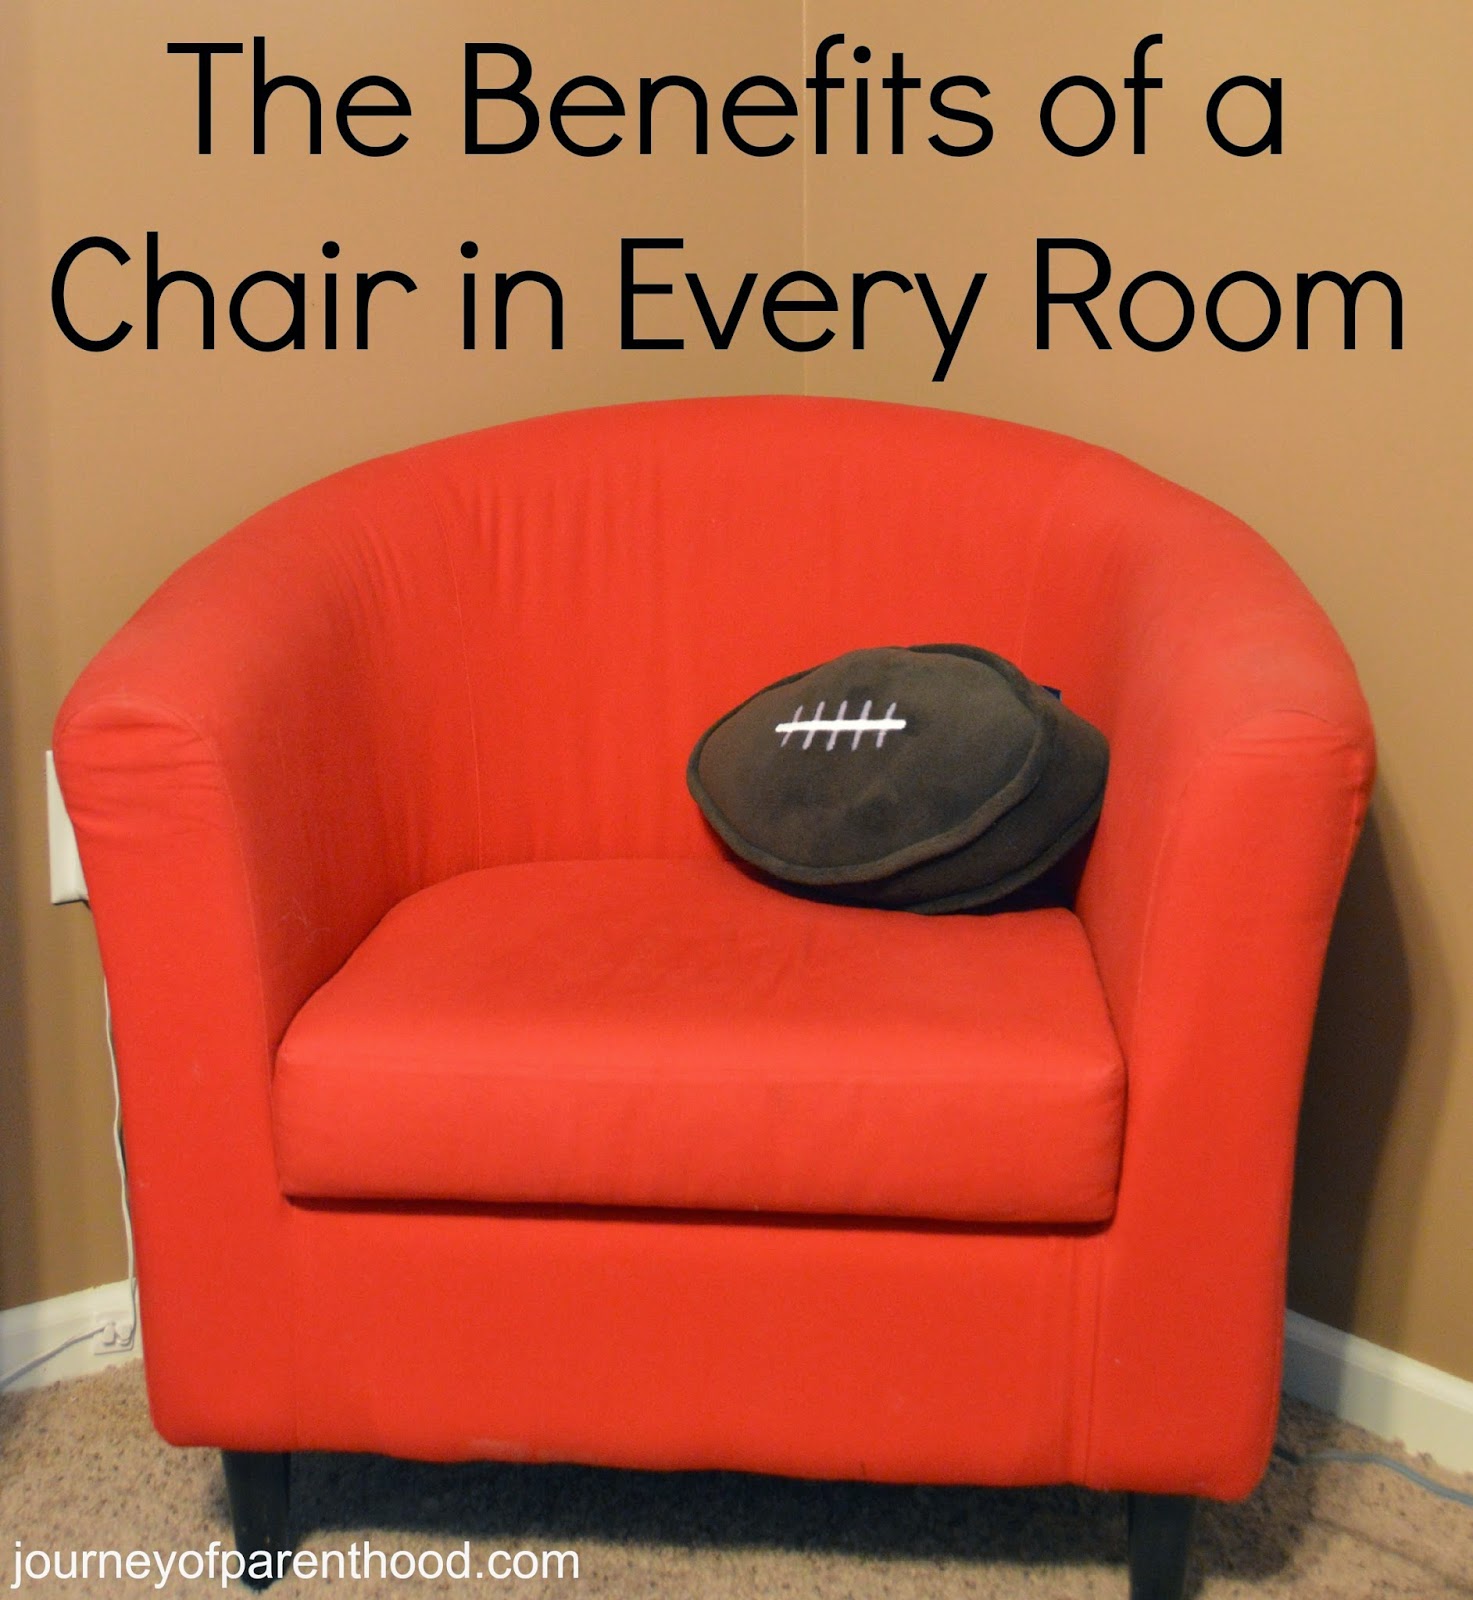 The Benefits of a Chair in Every Room